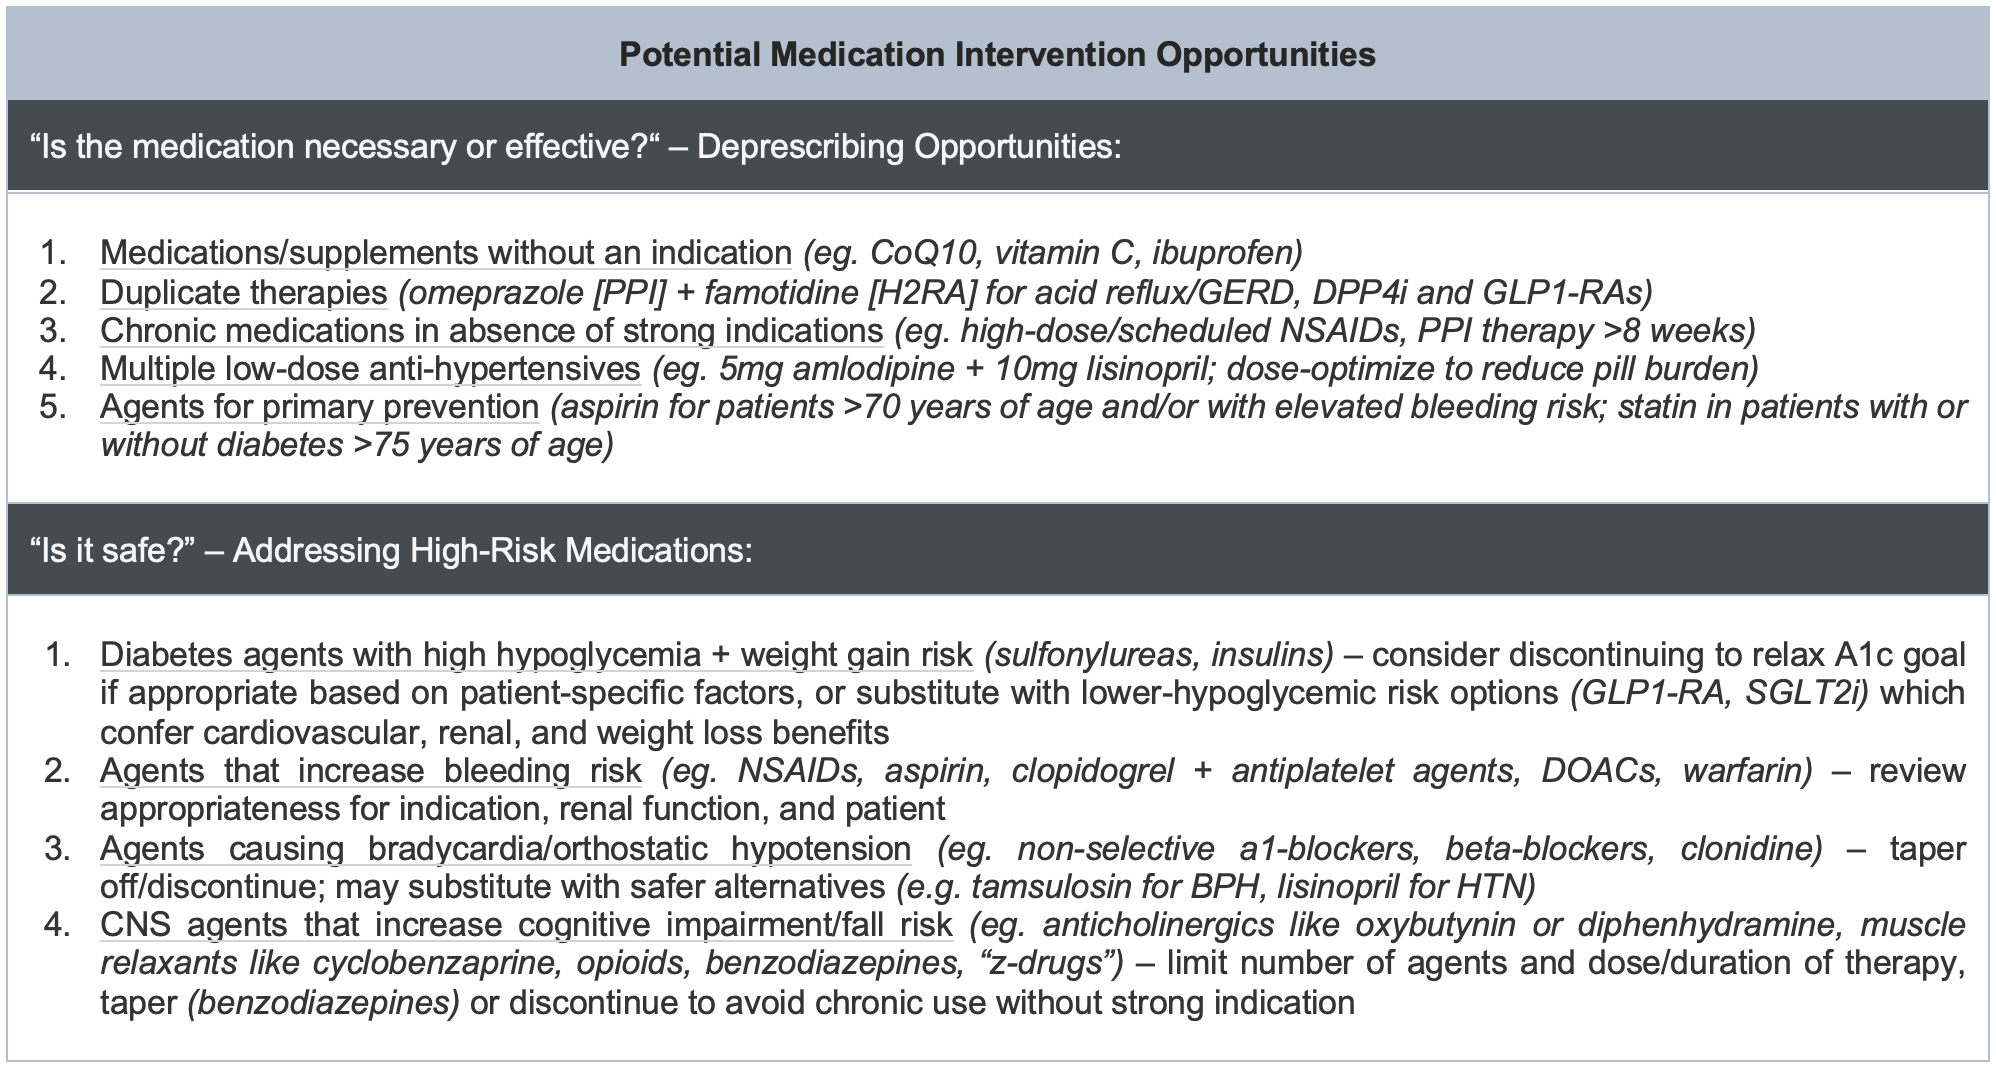 Potential Medication Intervention Opportunities